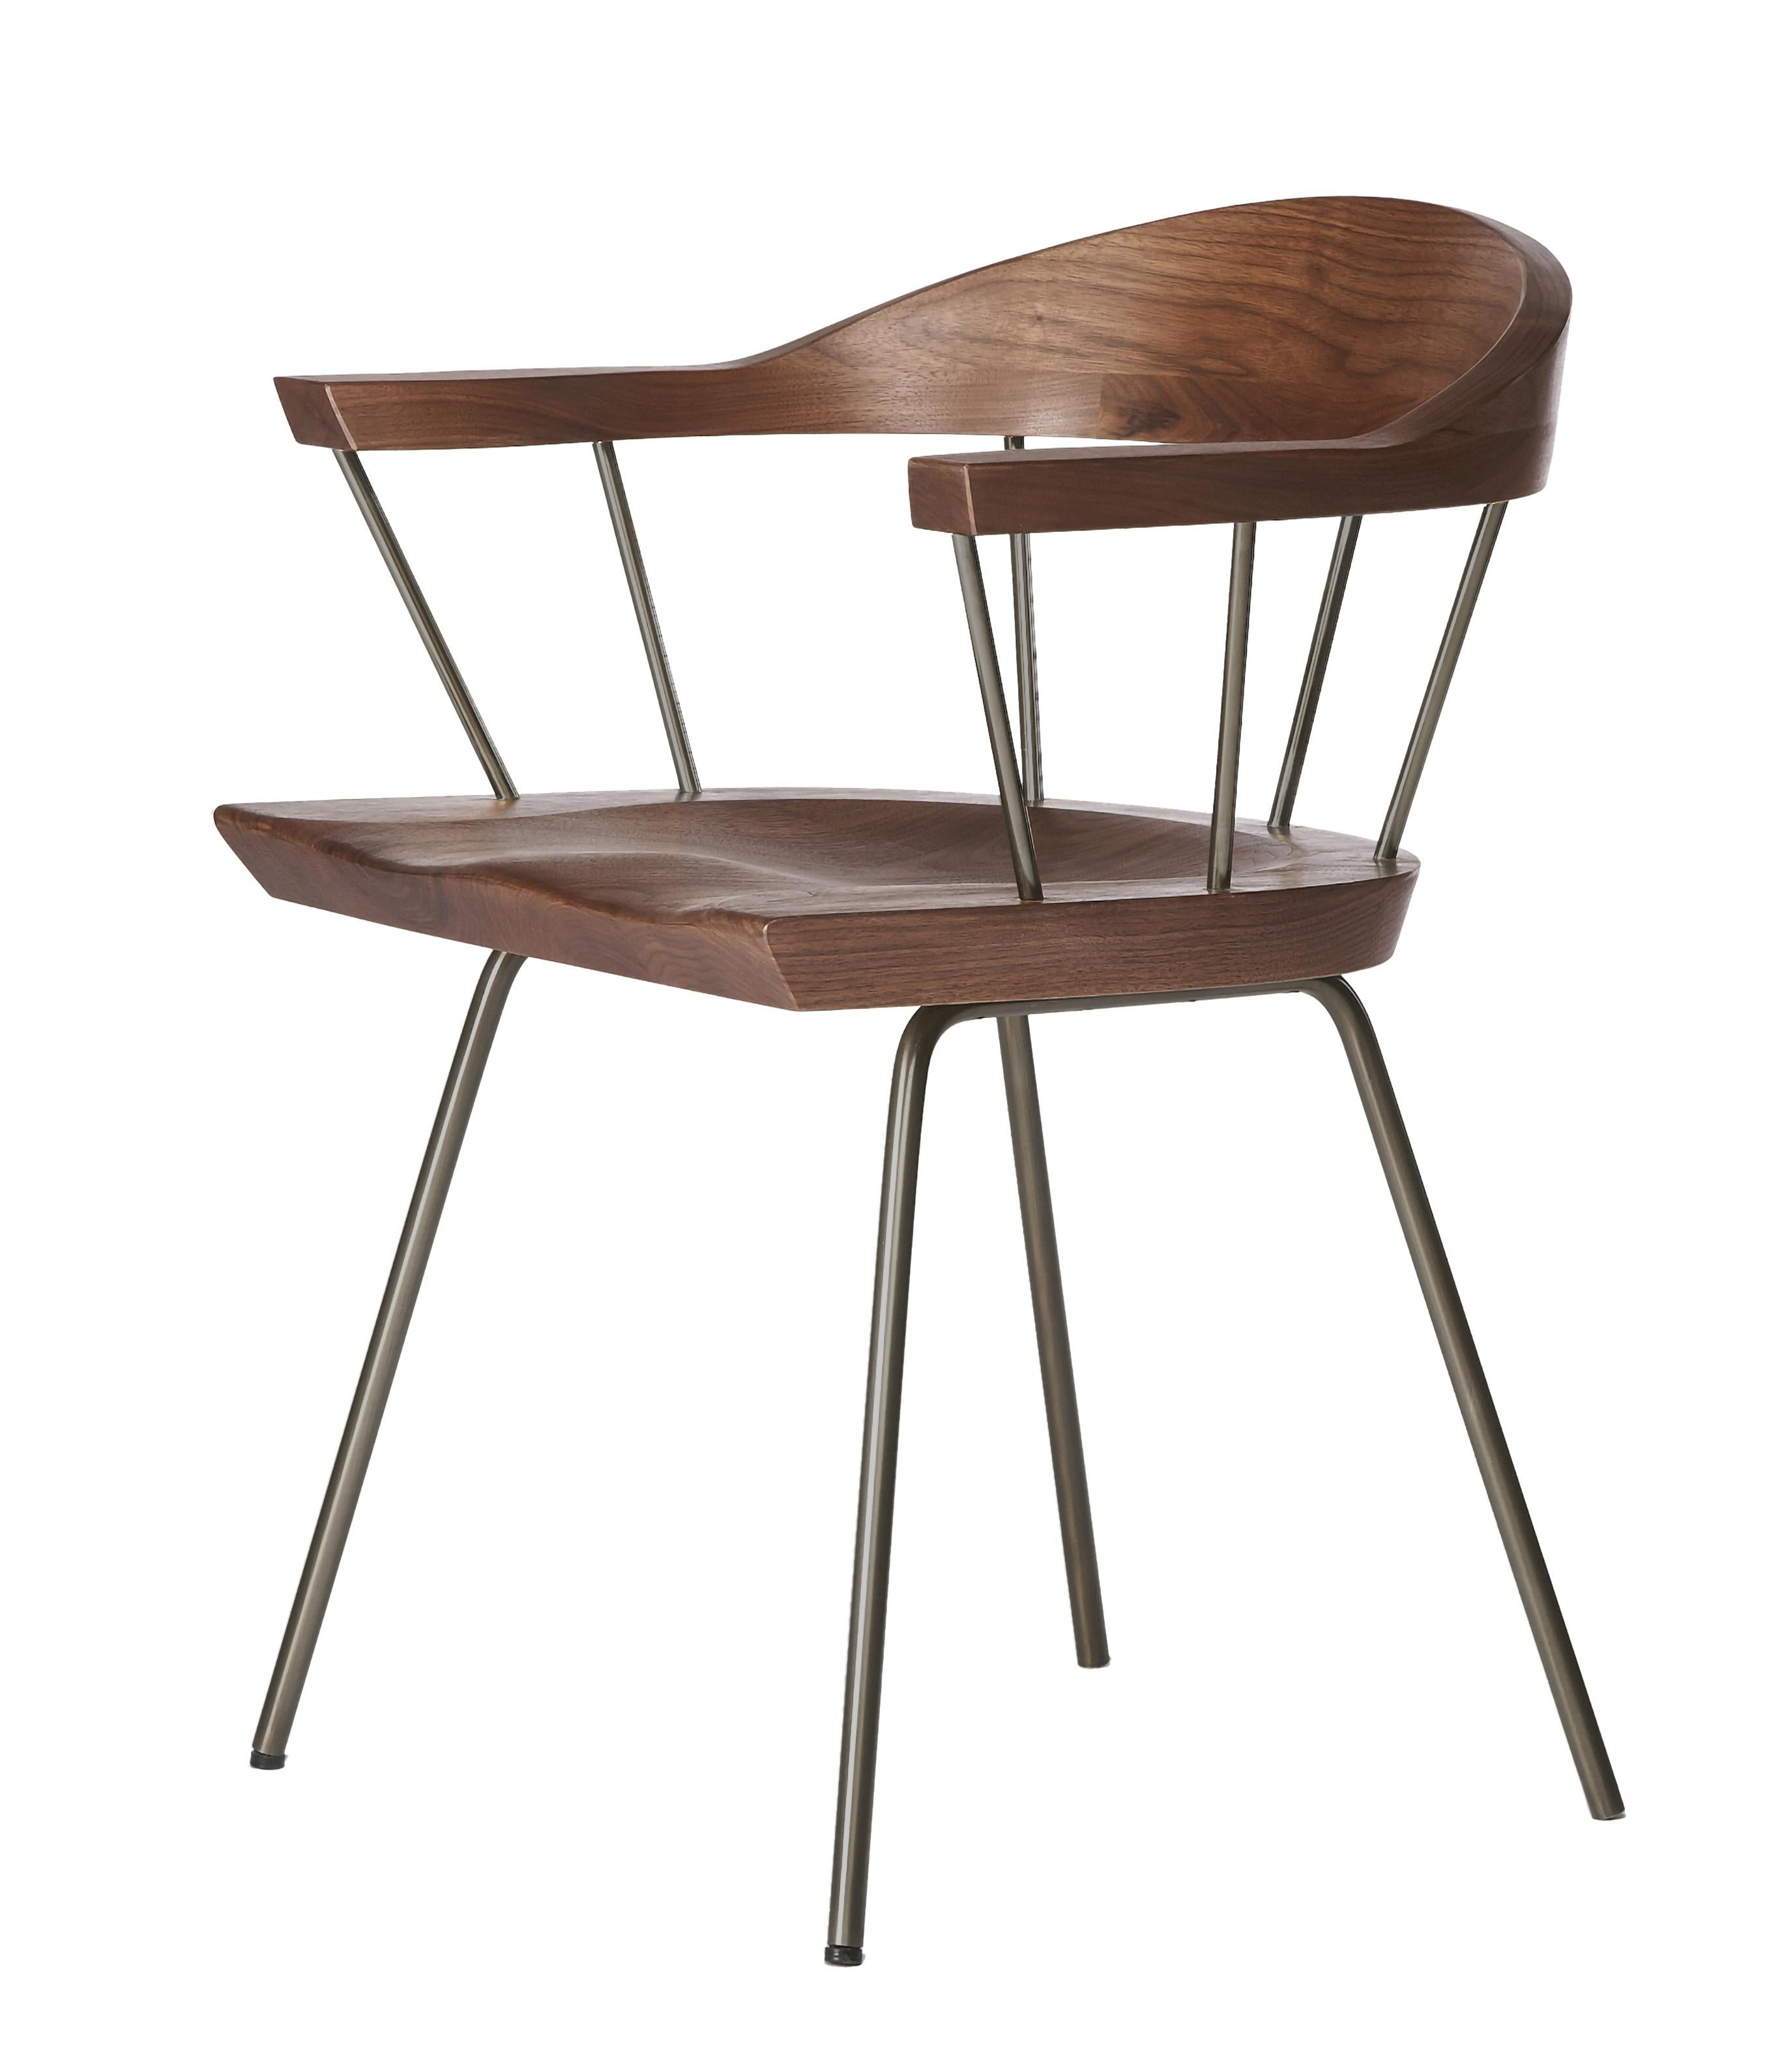 For Sale: Gray (Metal Bronze) Spindle Chair in Solid, Carved Walnut and Steel Designed by Craig Bassam